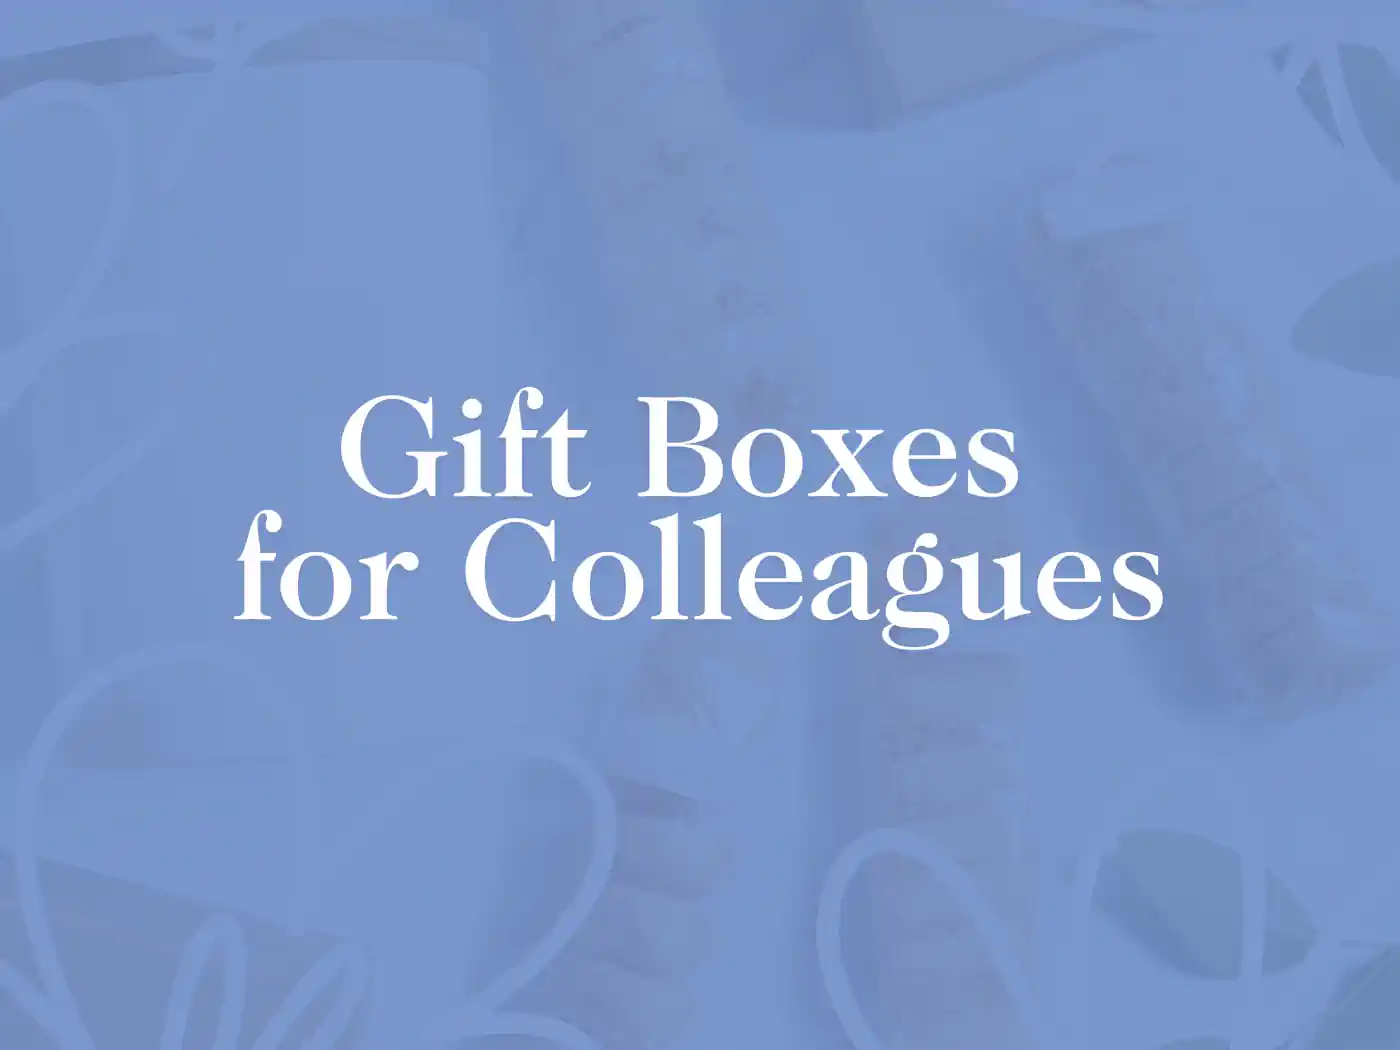 Promotional image featuring the text 'Gift Boxes for Colleagues' in elegant white script on a soothing blue background with subtle outlines of gift items, designed to promote thoughtful and heartwarming gifts for office peers. Delivered with heart by Fabulous Flowers and Gifts.